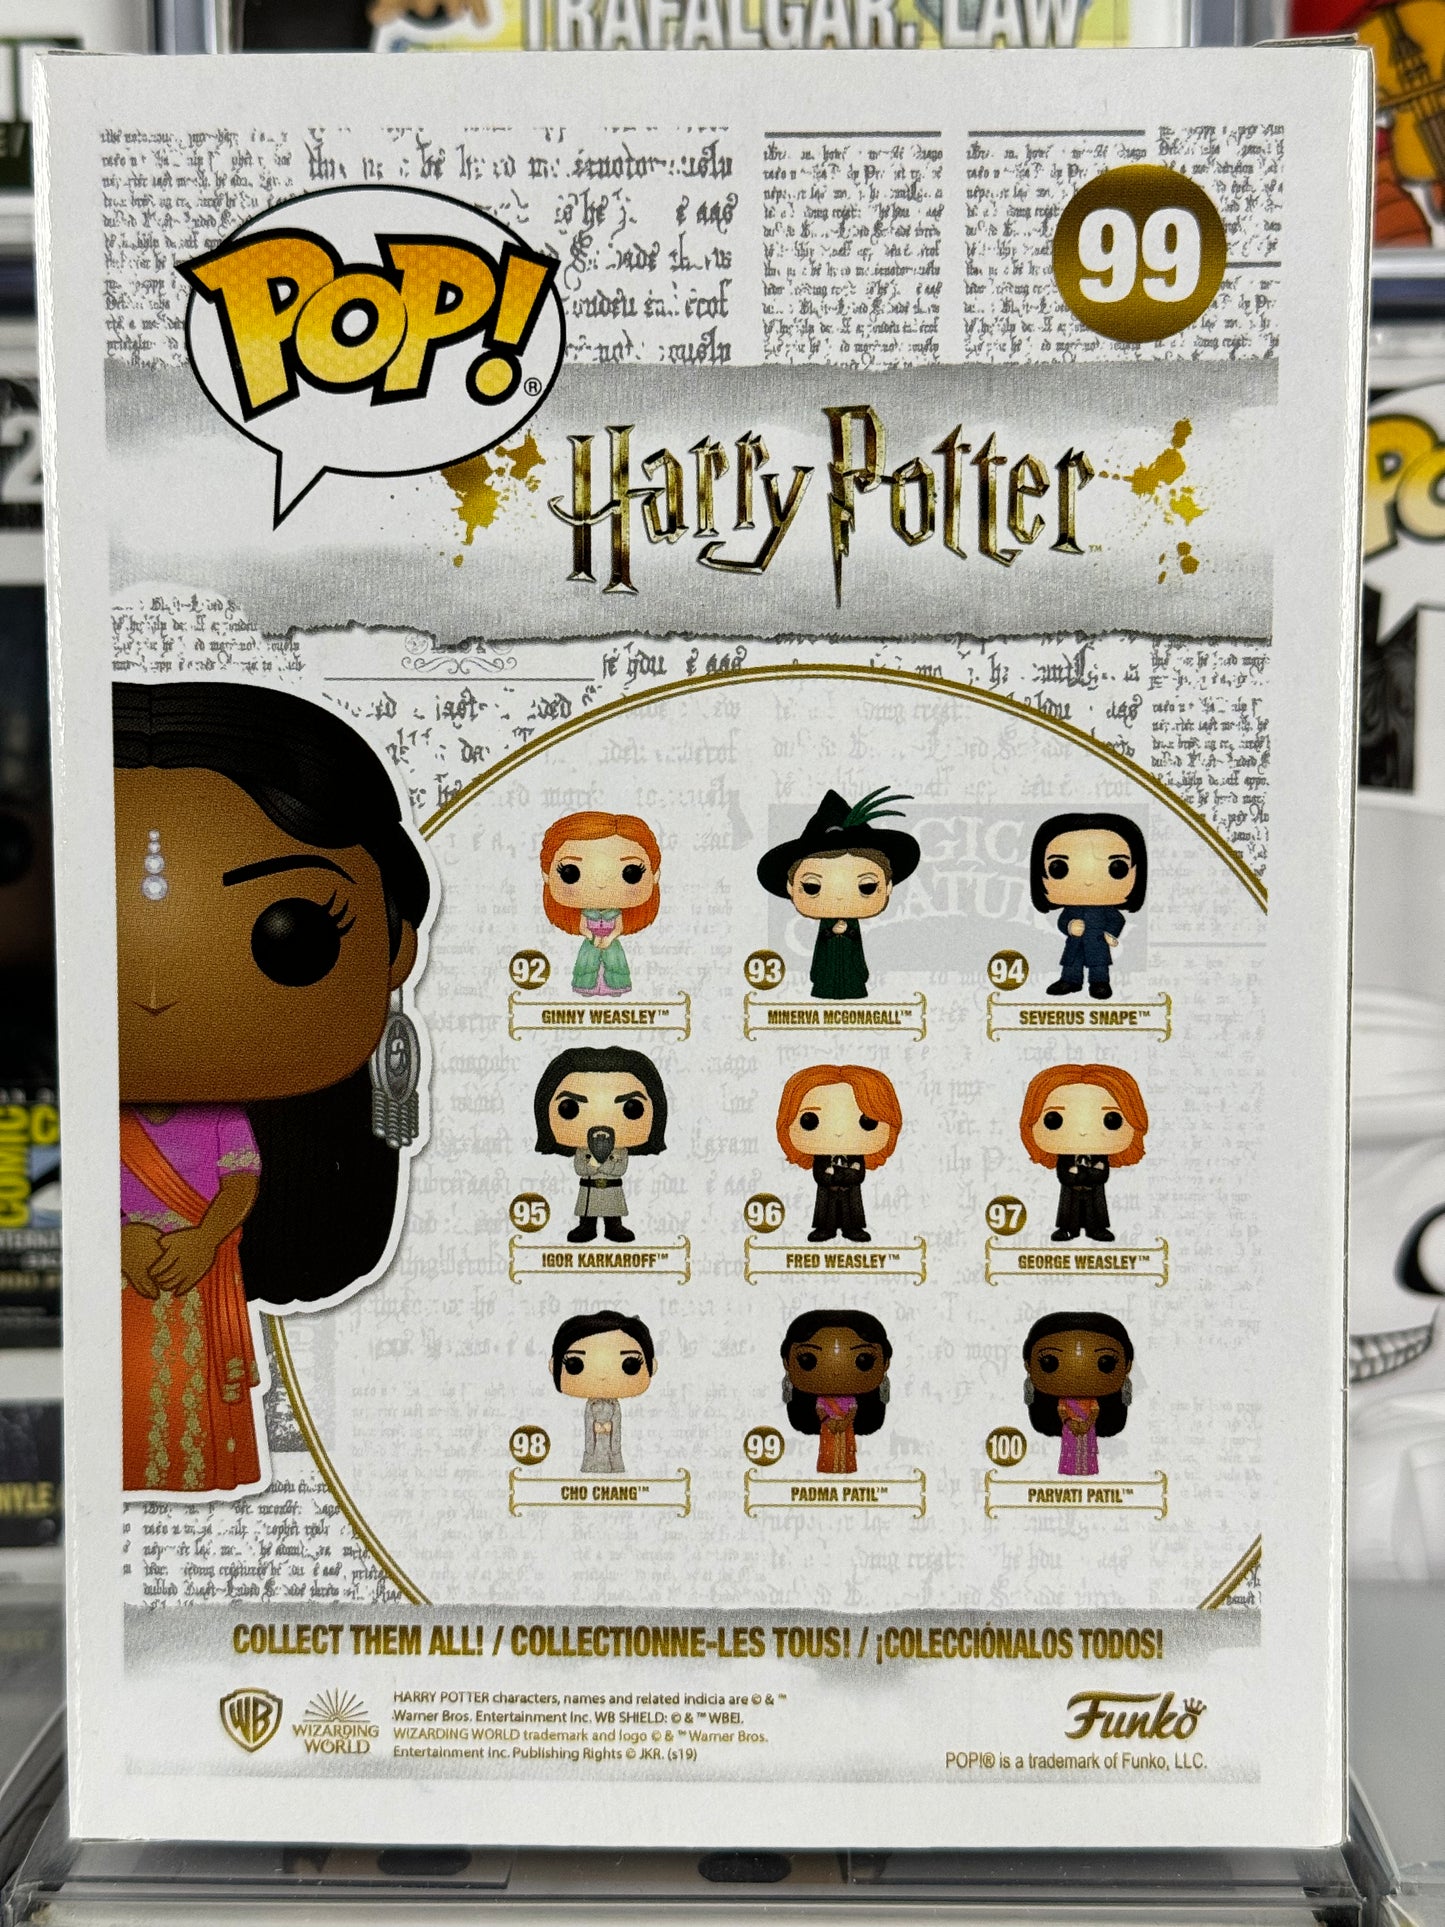 Wizarding World of Harry Potter - Padma Patil (Yule Ball) (99) Vaulted